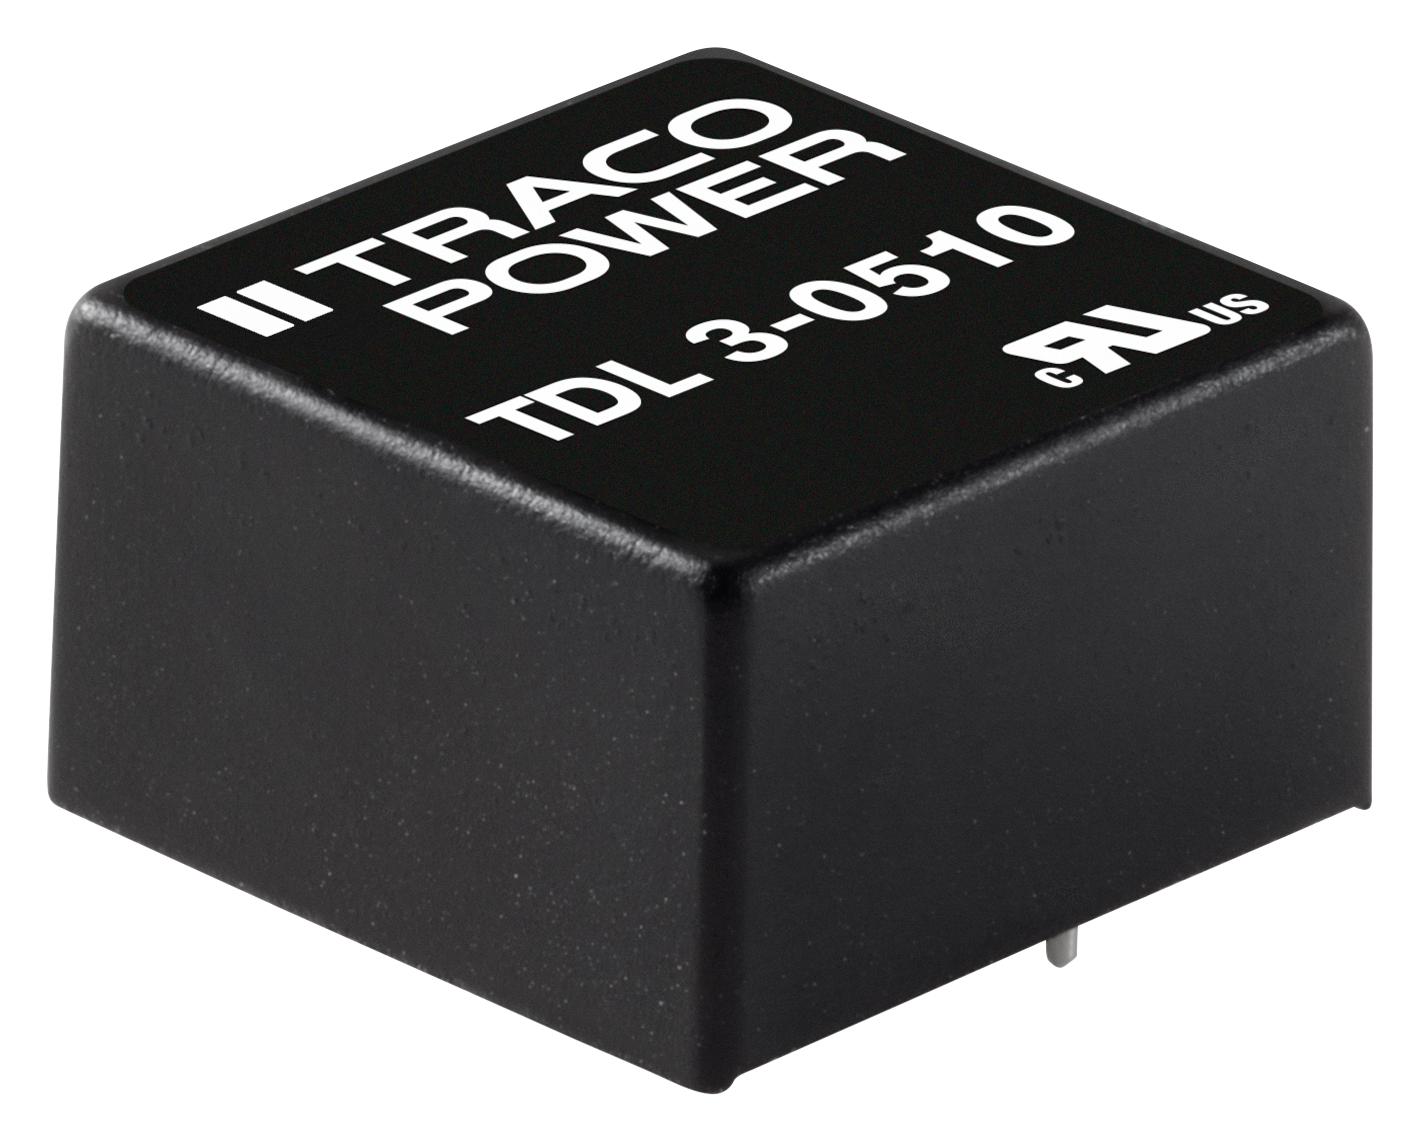 TDL 3-4822 DC-DC CONVERTER, 2 O/P, 3W TRACO POWER